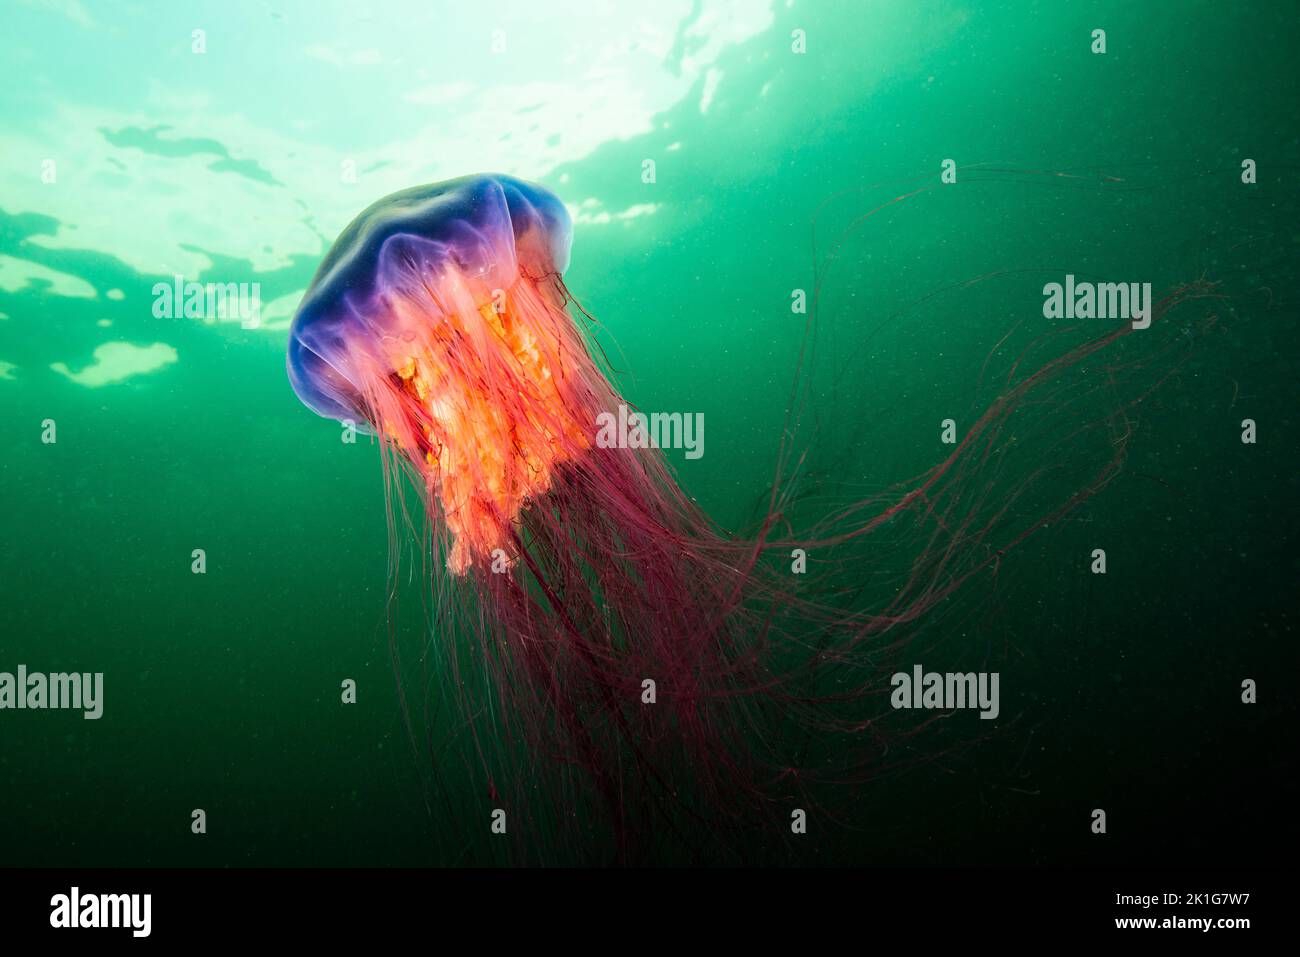 Lion's Mane jellyfish drifting underwater in the gulf of st.Lawrence Stock Photo